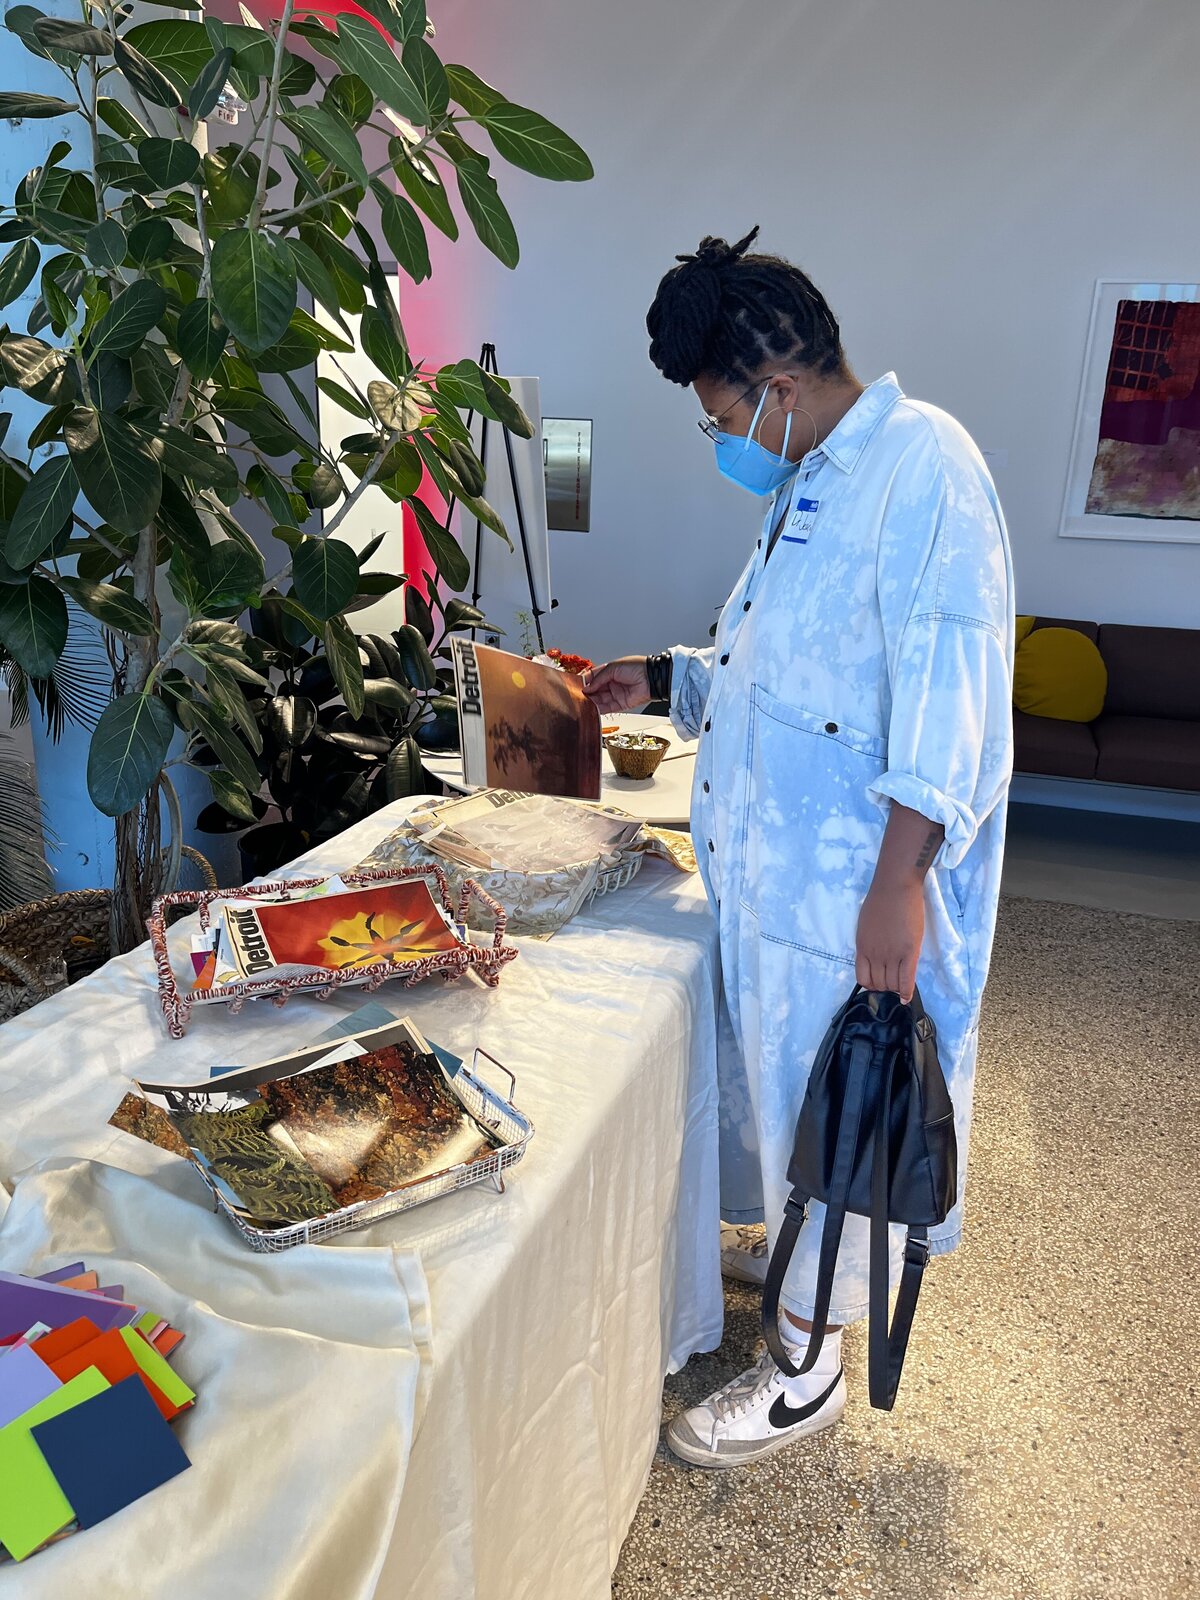 Person is looking through collage materials before the collage workshop by Nourish Events